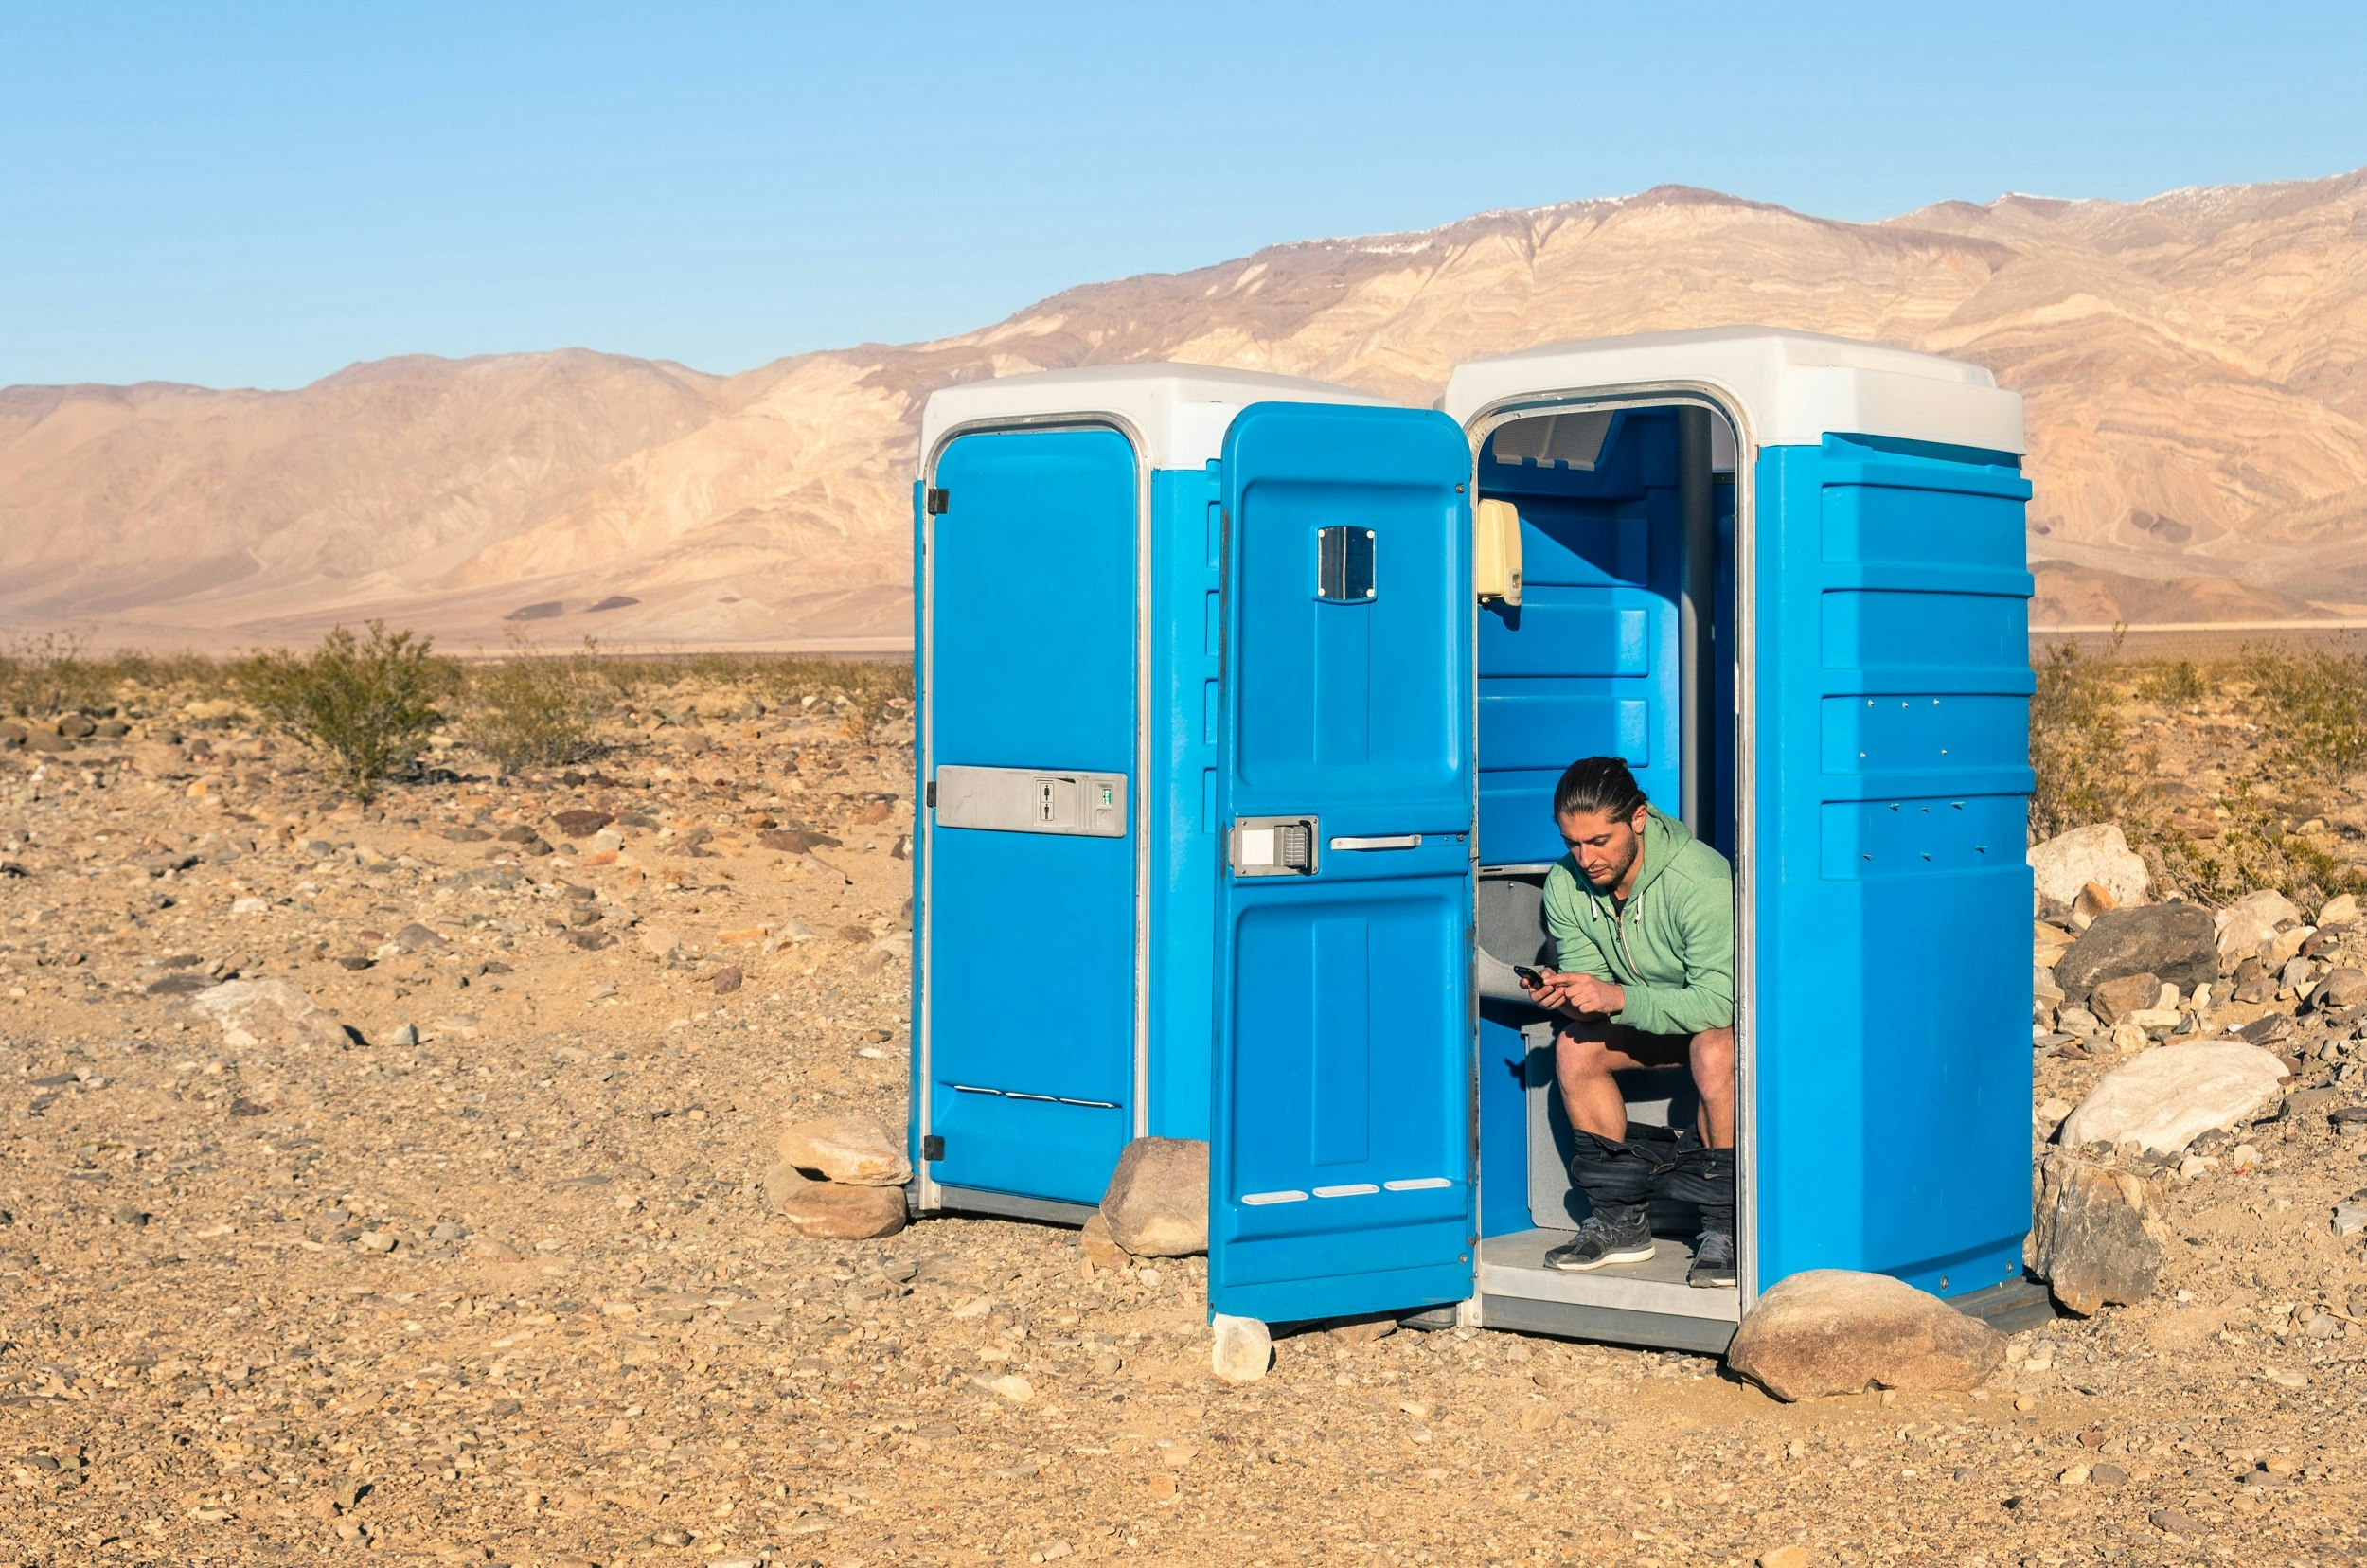 A man sits in a blue portable toilet with the door open; there is another loo next to his with the door closed. It's in Death Valley so that background is very barren.